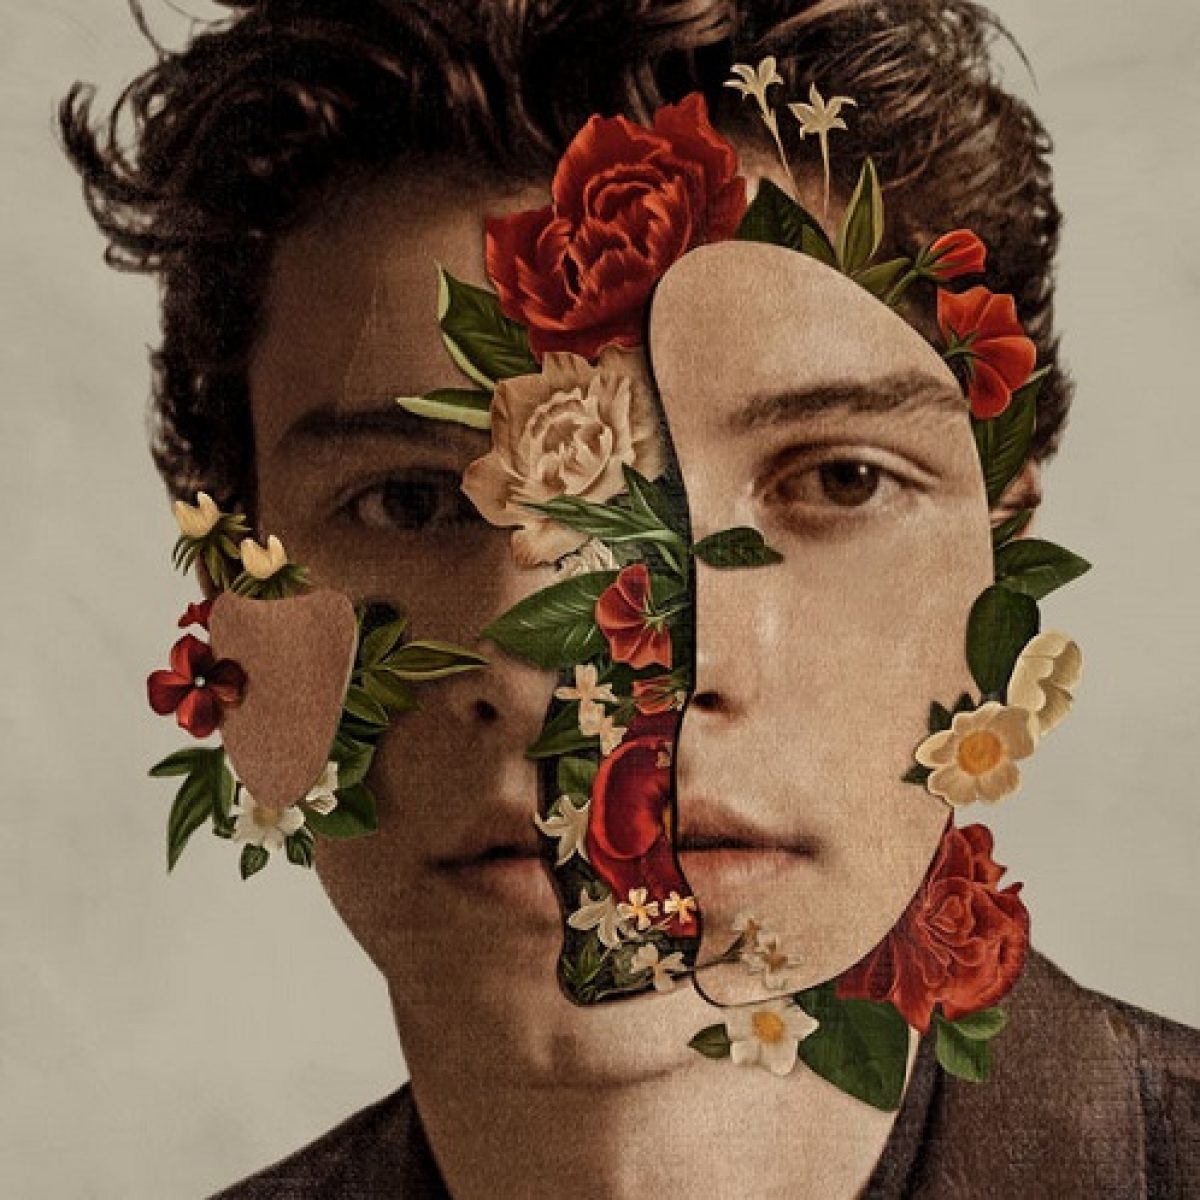 Shawn Mendes, Shawn Mendes